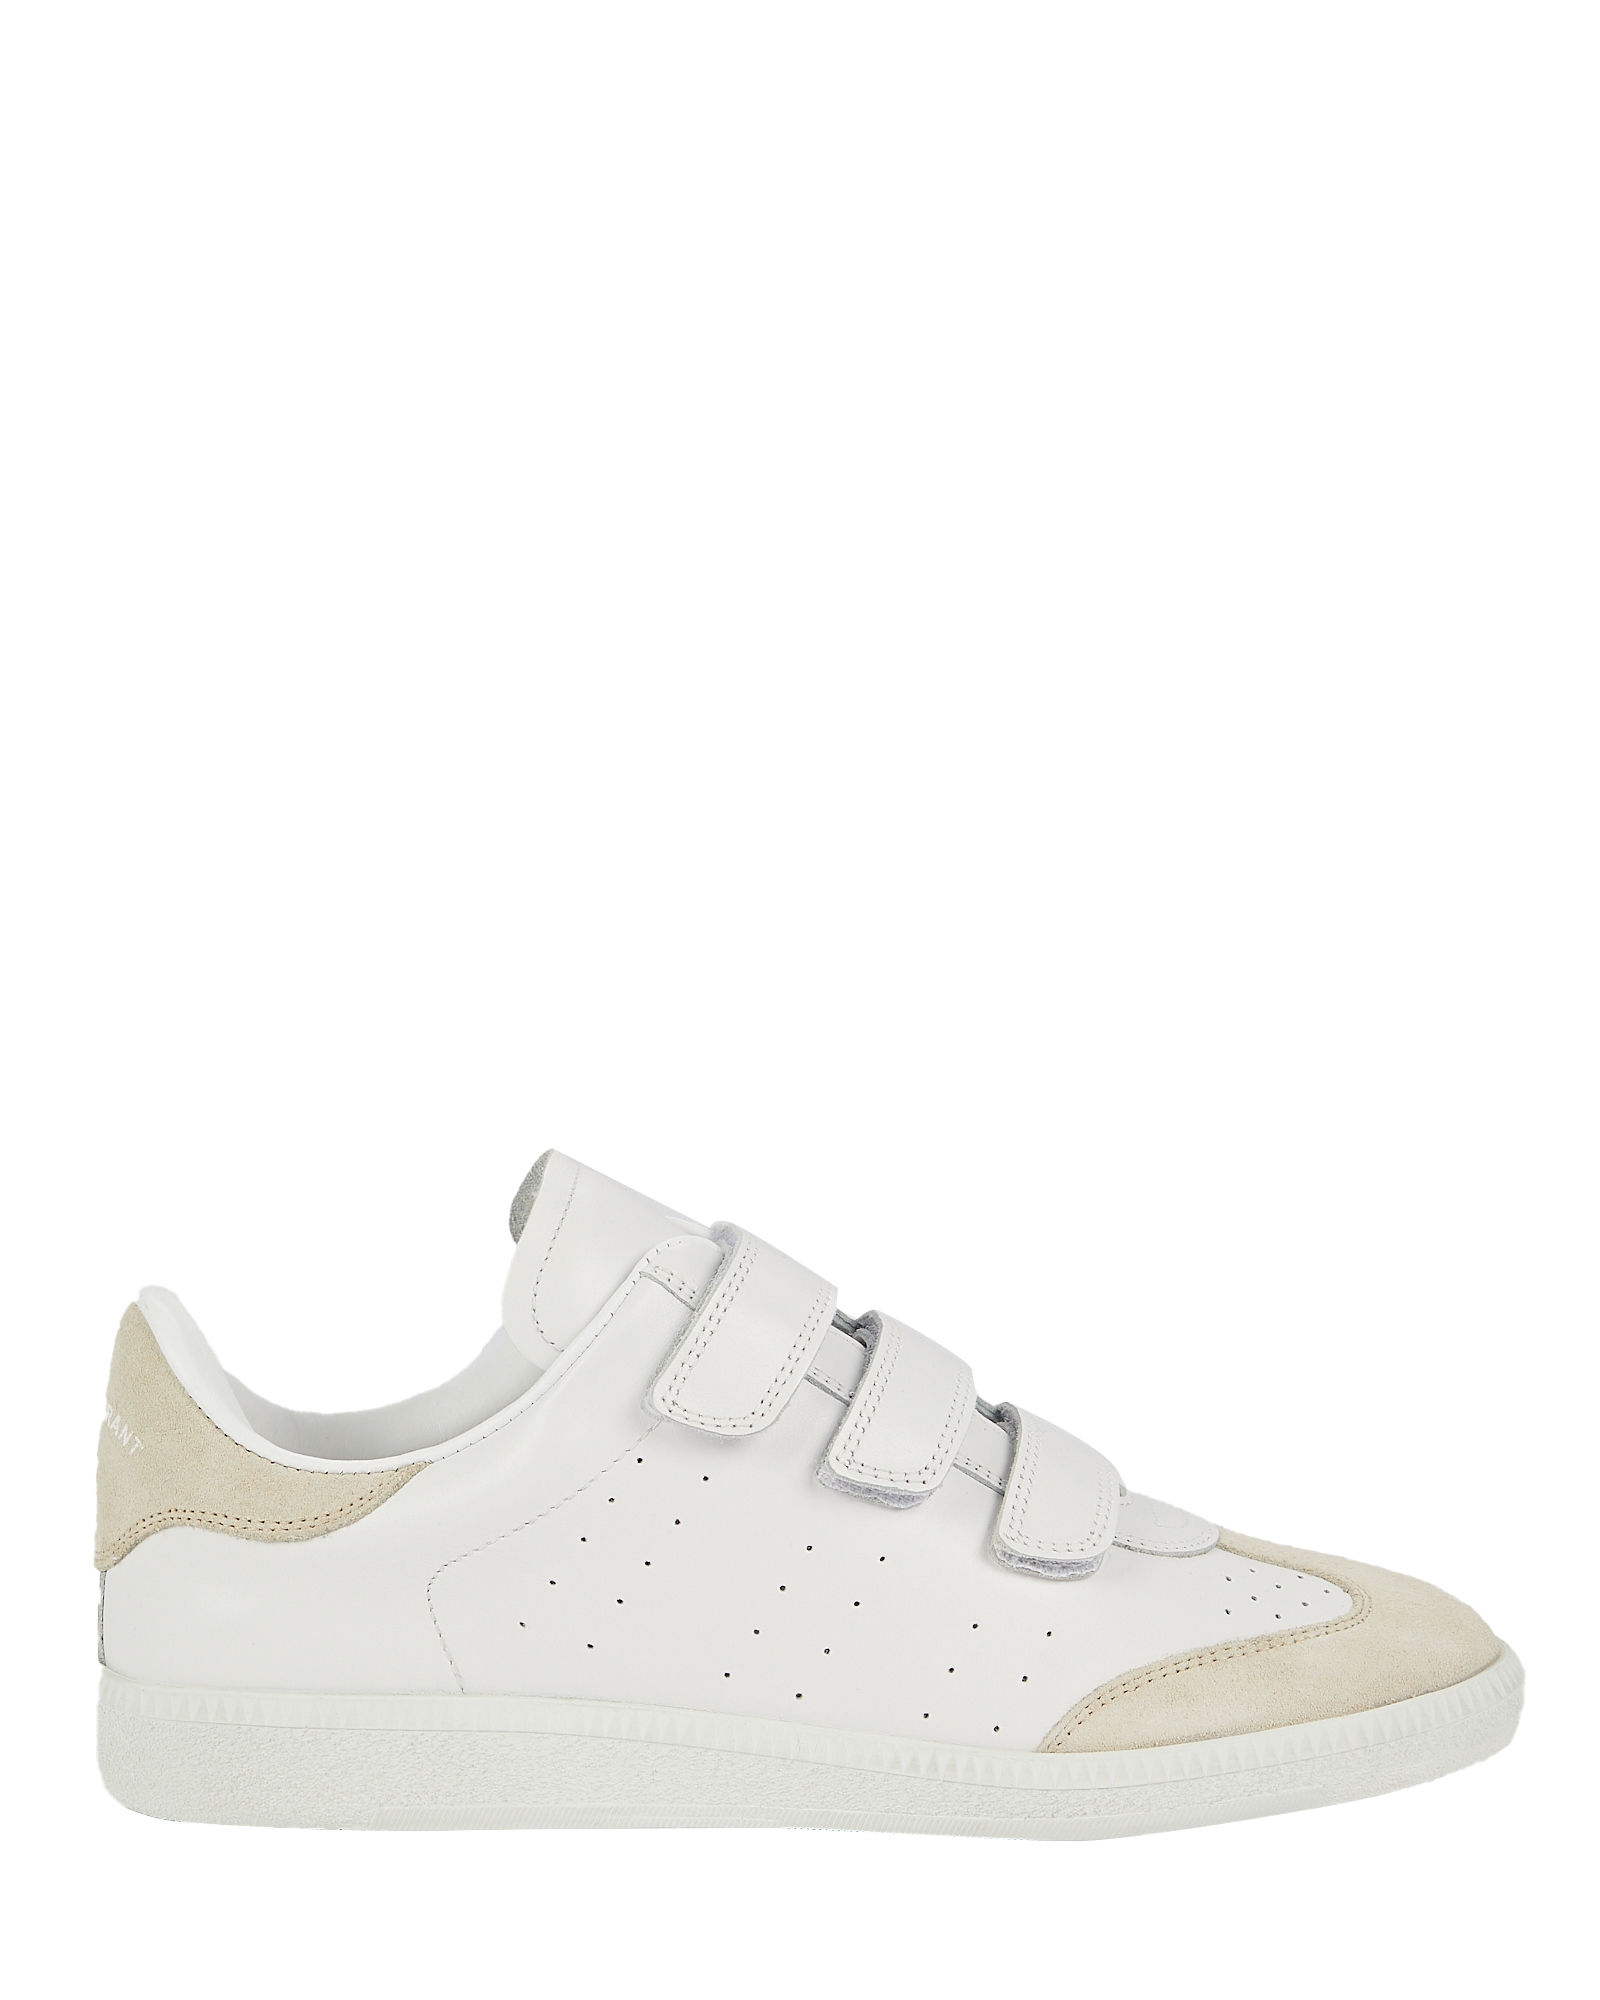 Isabel Marant Beth Velcro Leather Sneakers | INTERMIX®